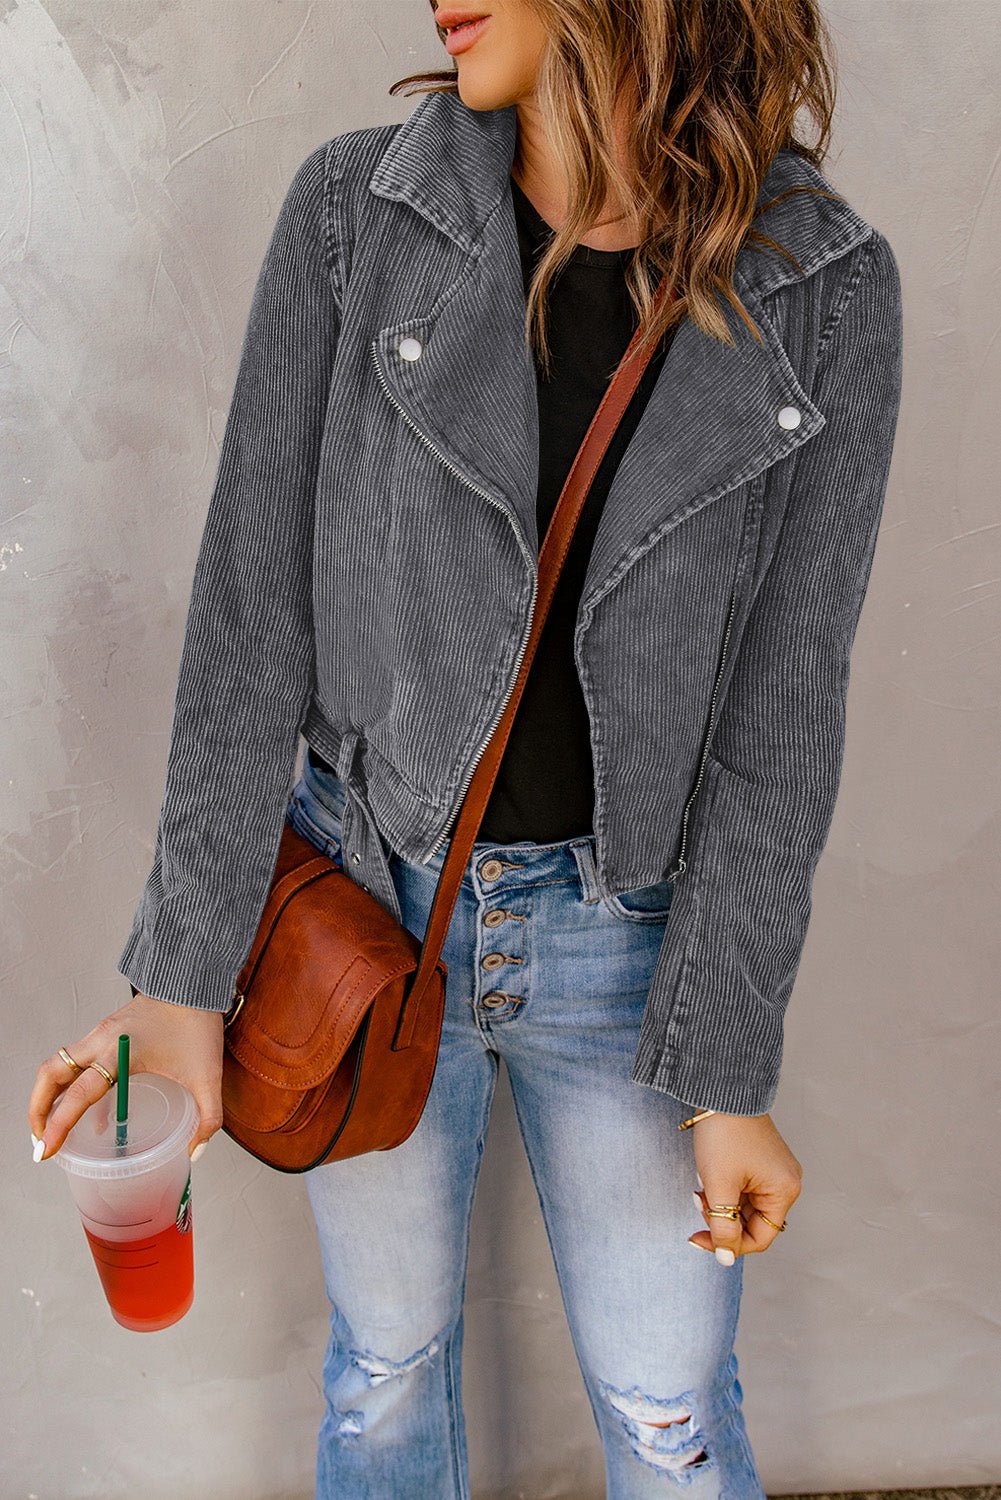 Belted Zip-Up Corduroy Jacket - Fashion Girl Online Store